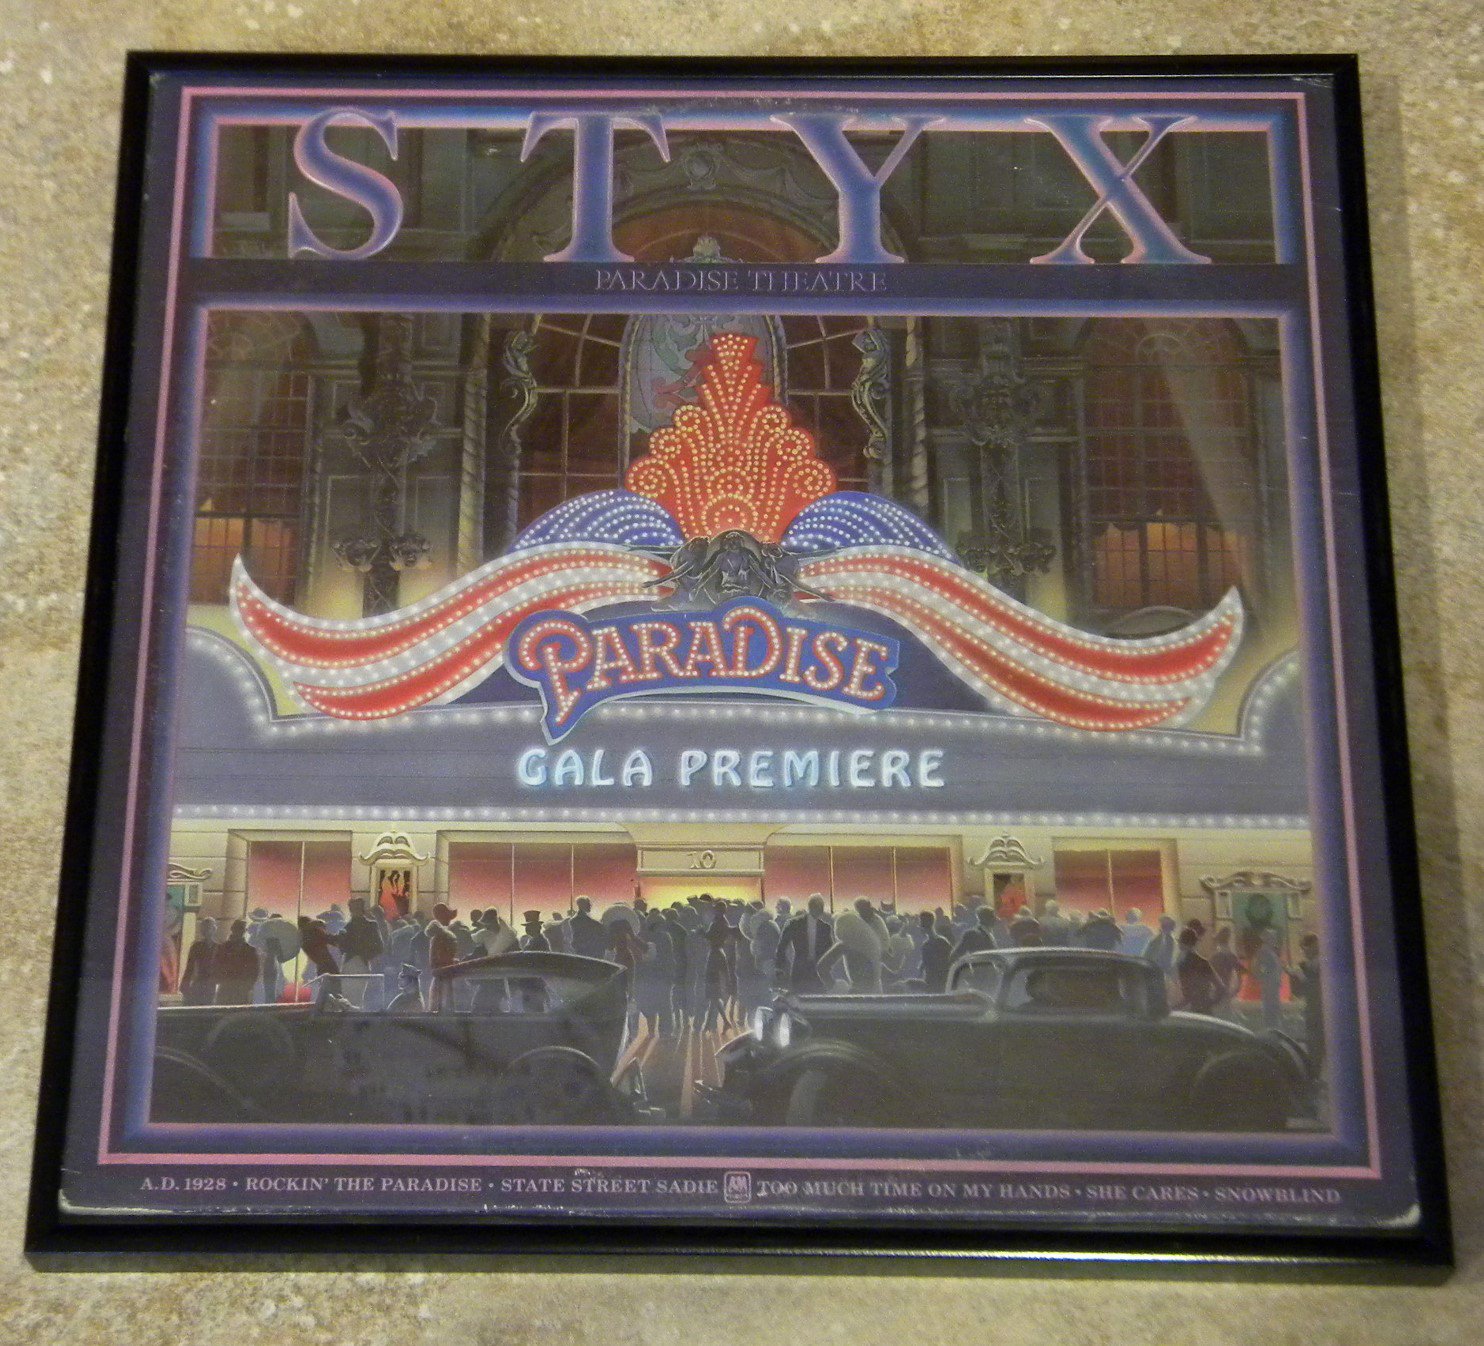 Paradise Theater - Styx - Framed Vintage Record Album Cover – 0185